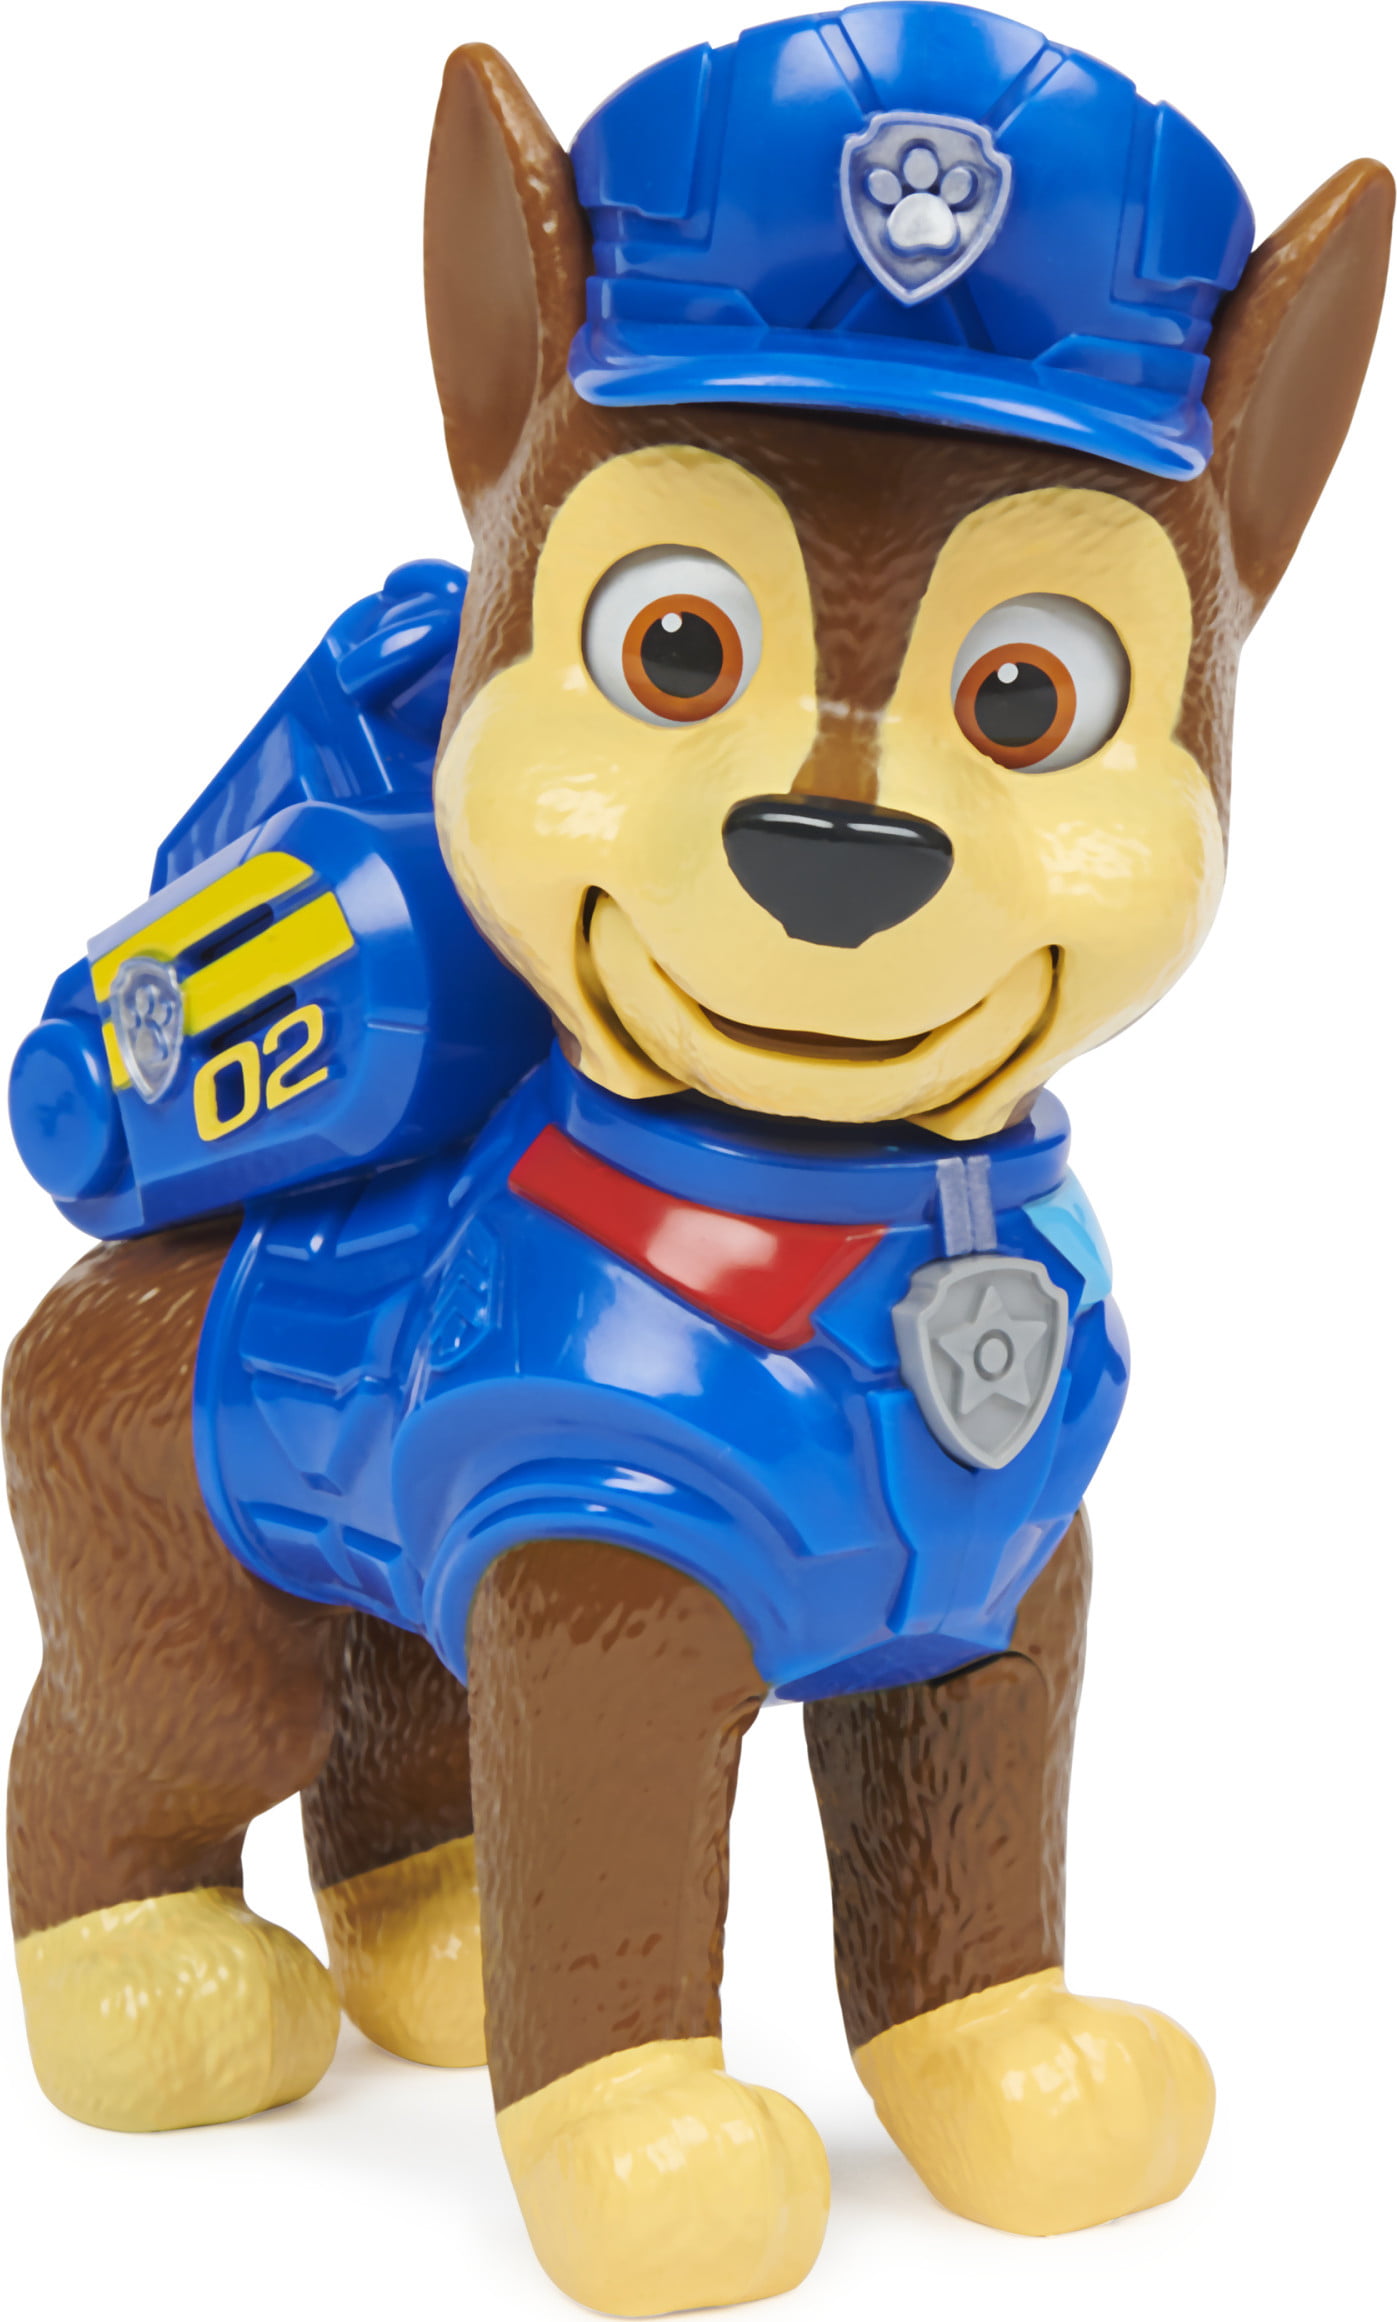 PAW Mission Pup with Sounds & (Walmart Exclusive) - Walmart.com